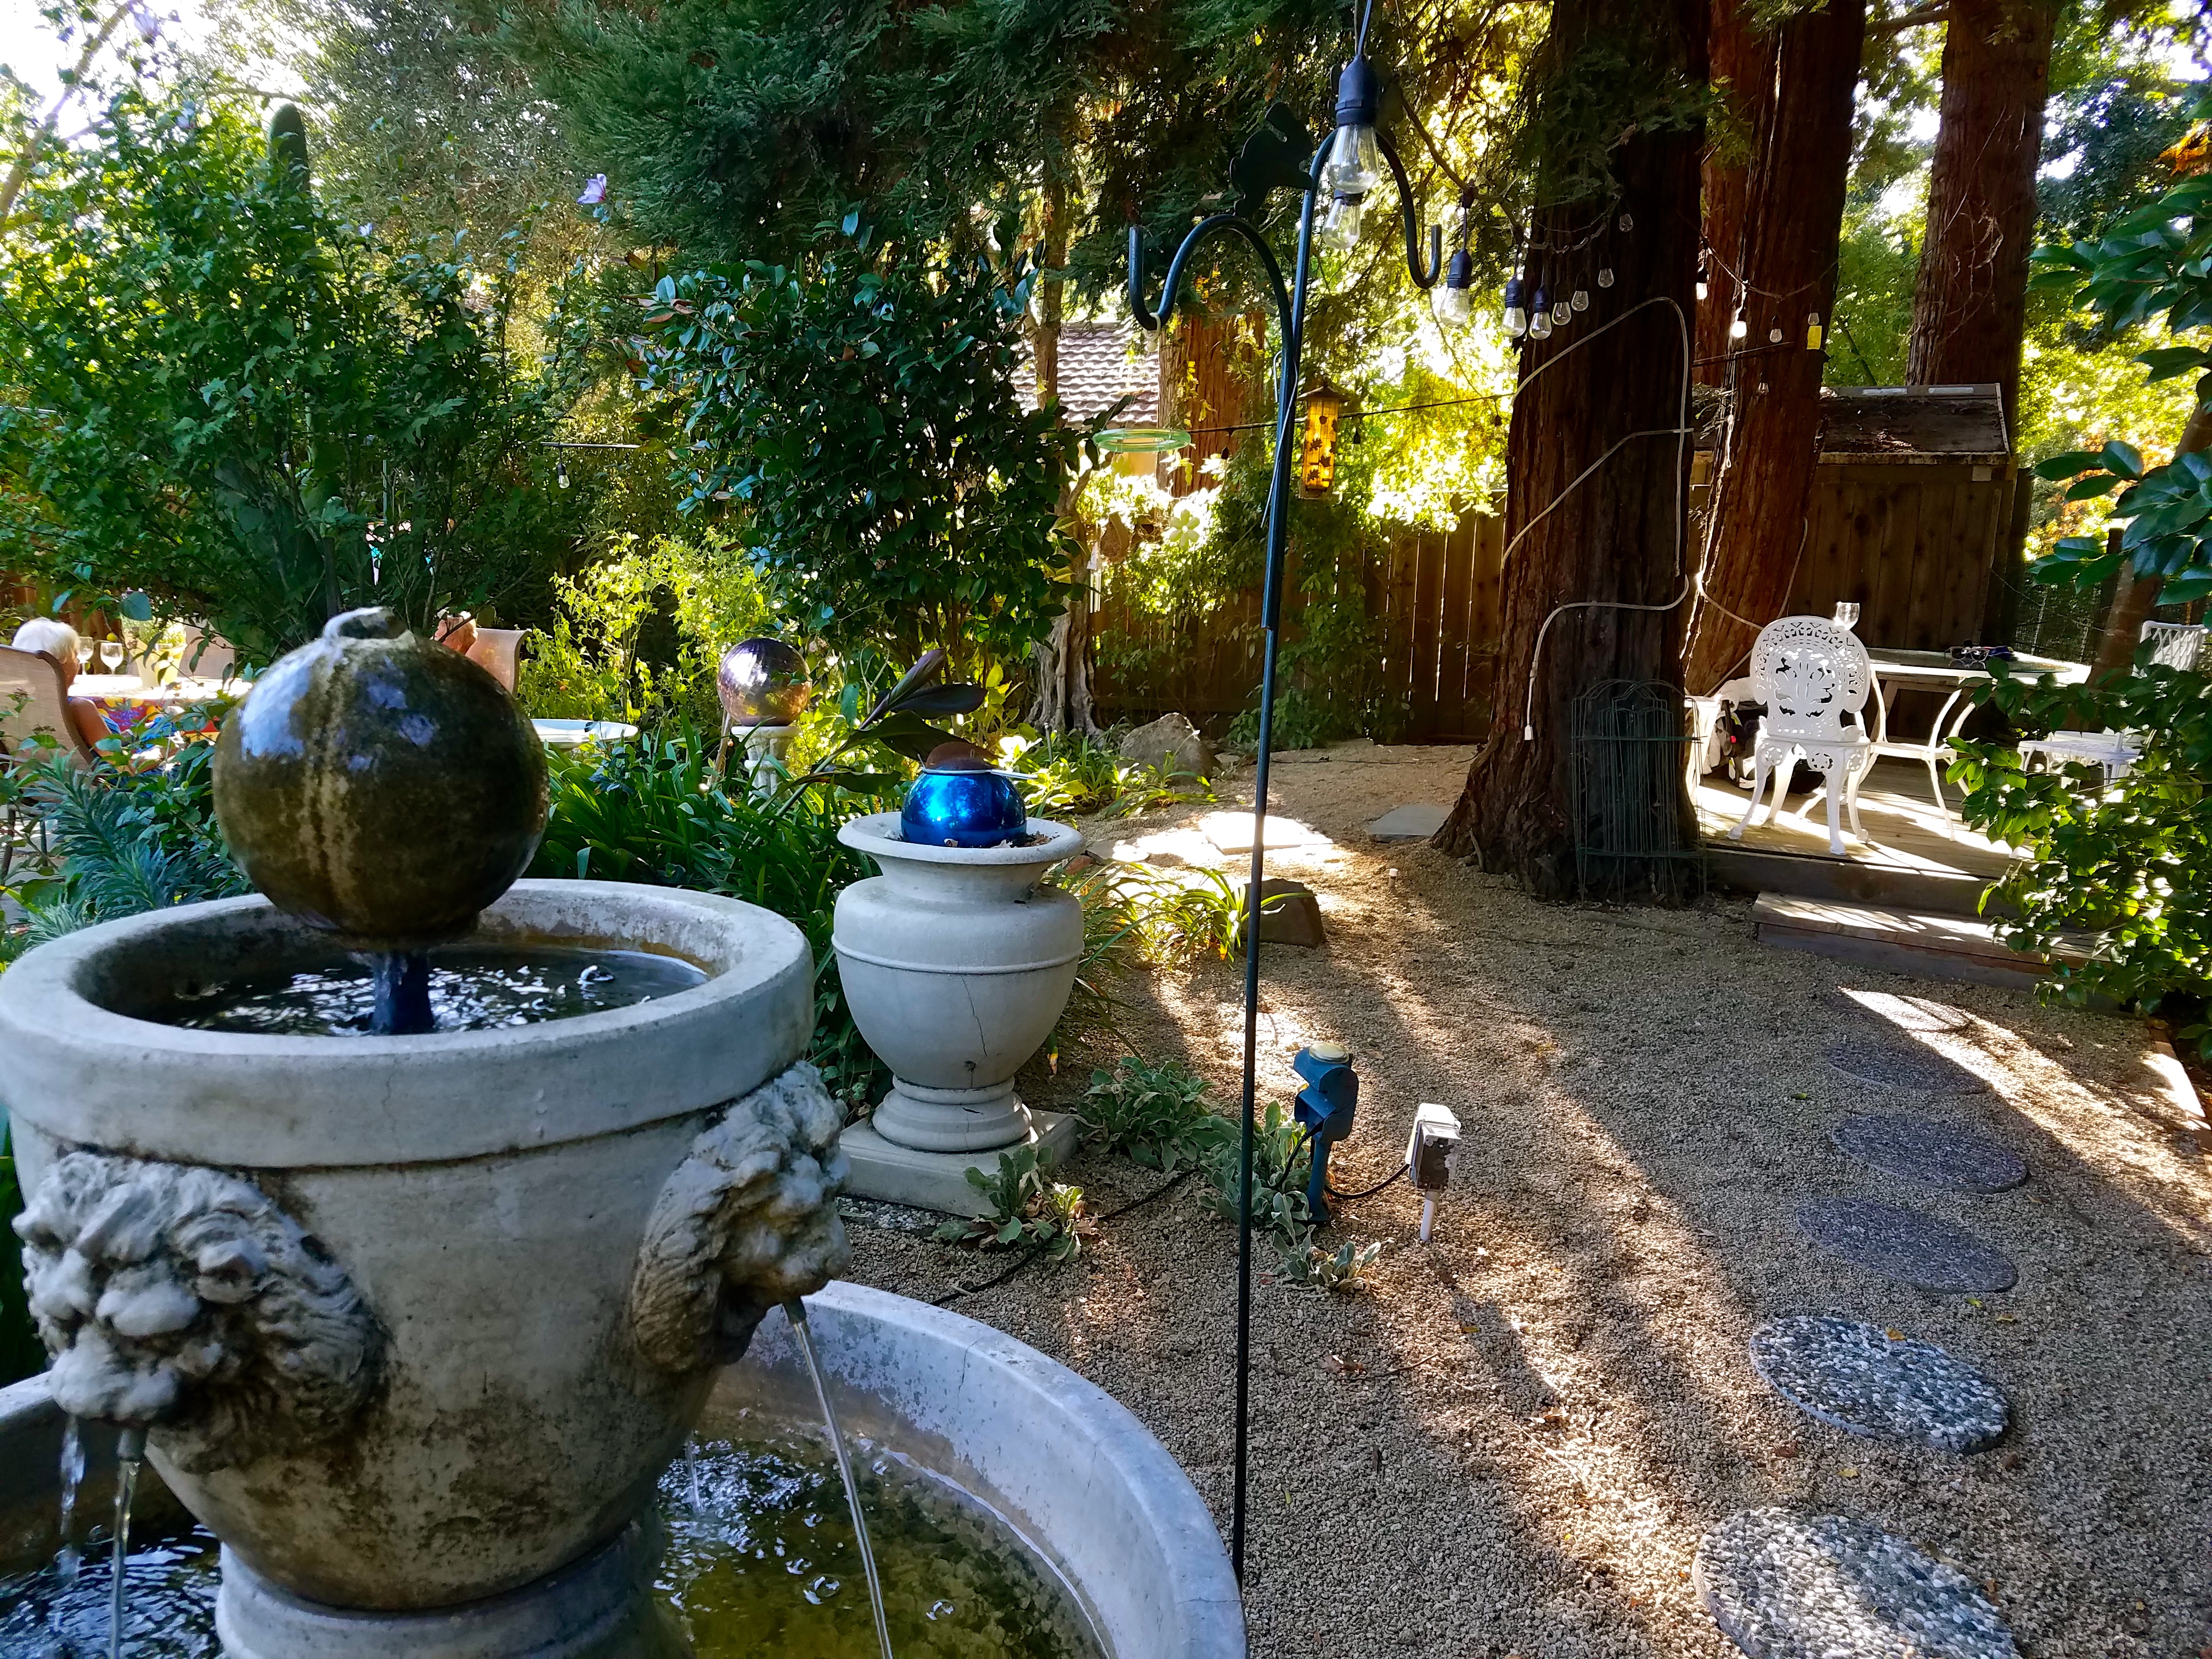 Just a slice of Sunday’s Garden Party in an expansive yard lined with redwoods, exotic flowers, deer and a creek